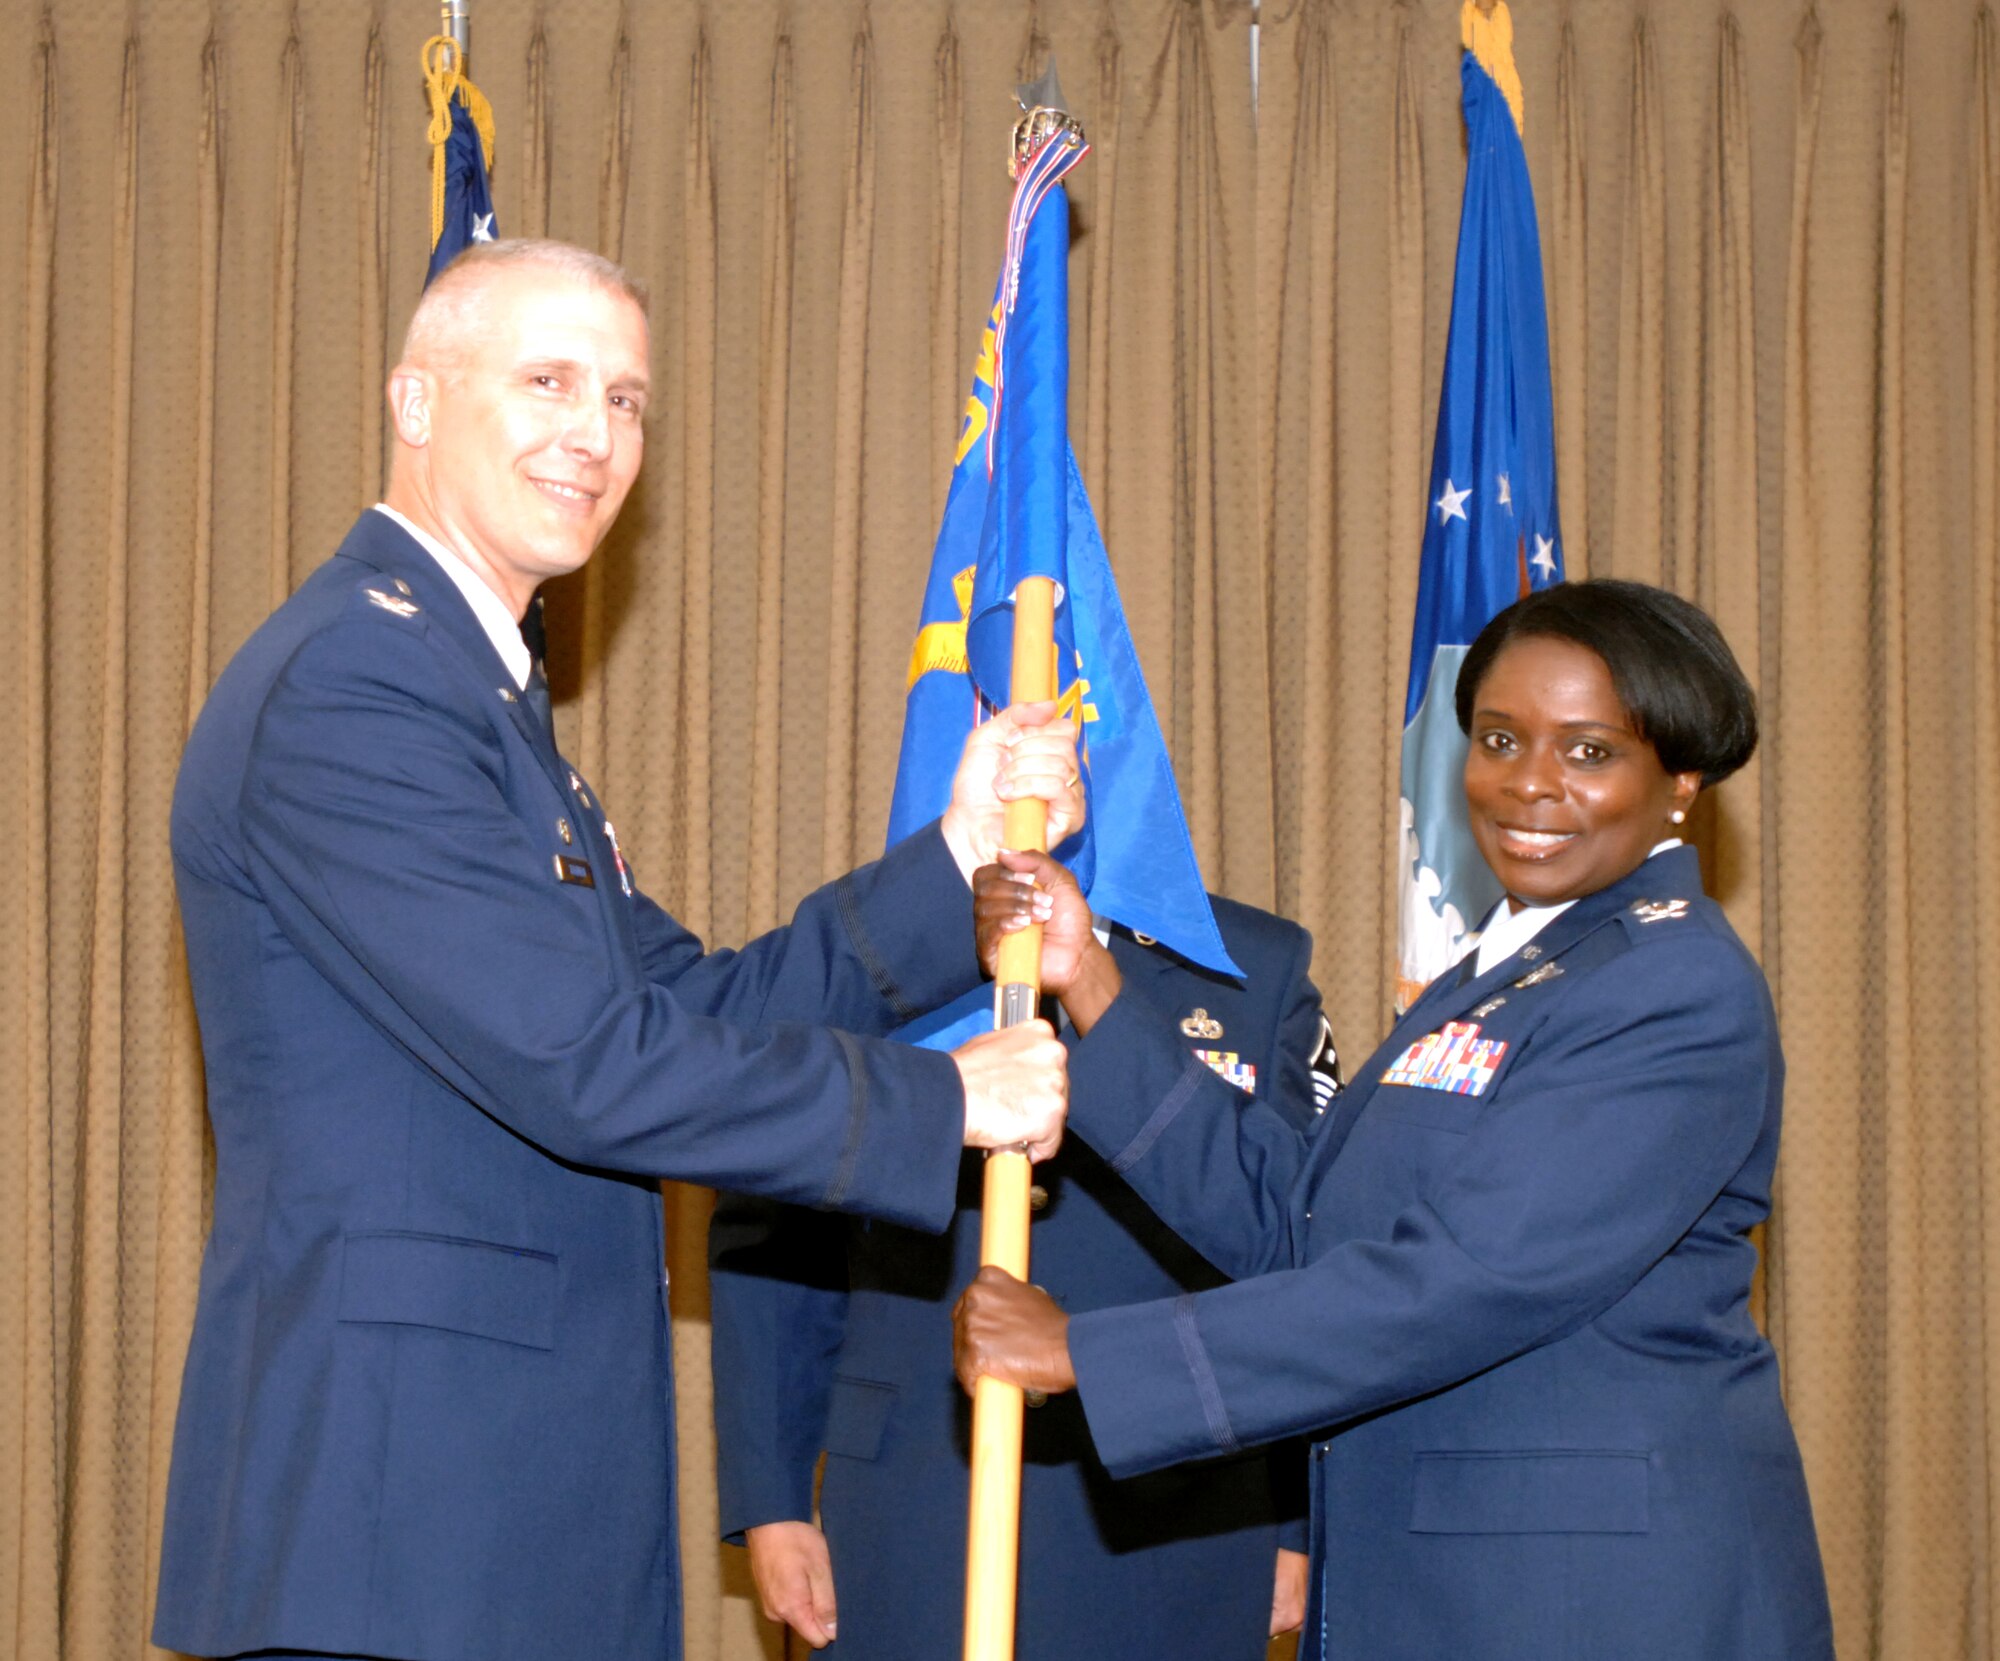 Col. Terri Bailey accepts the 319th Medical Group’s guidon from Col. Paul Bauman, 319th Air Base Wing commander, during a change-of-command ceremony July 19, 2013, on Grand Forks Air Force Base, N.D. Bailey replaced the outgoing 319th MDG commander, Col. Jane Denton. (U.S. Air Force photo/Staff Sgt. Susan L. Davis)